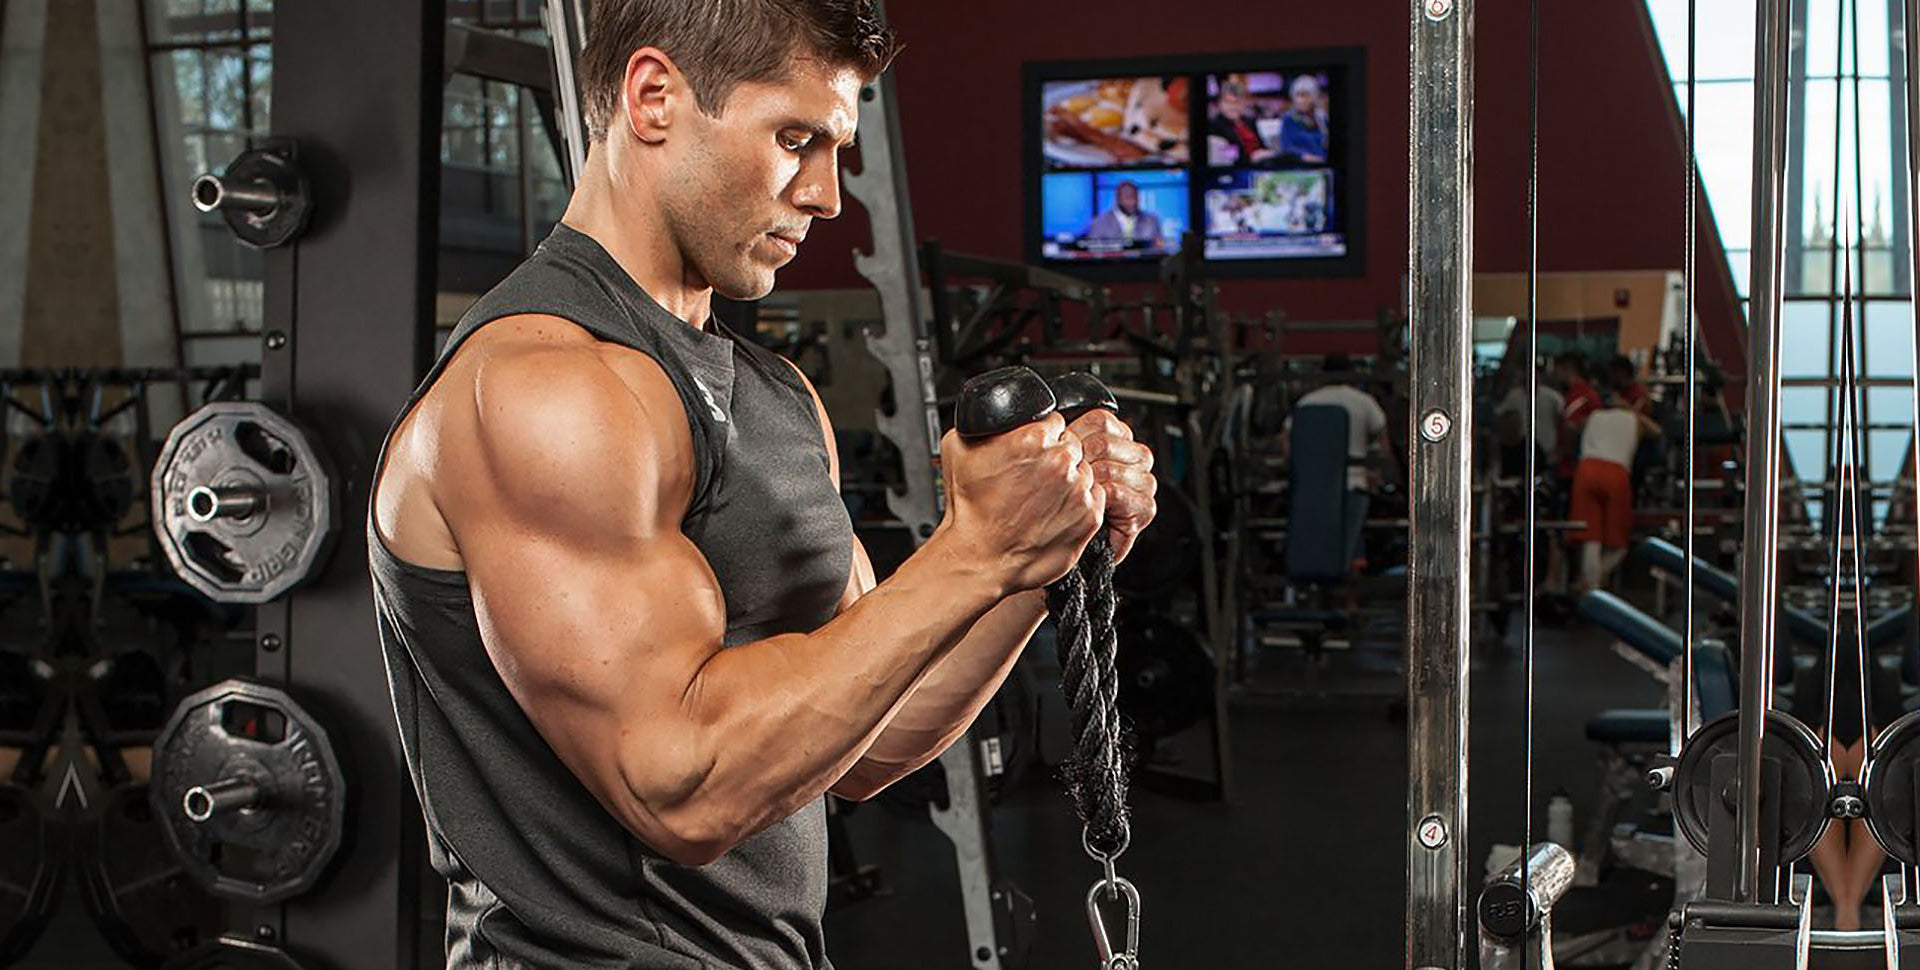 Best Biceps Cable Curls: Variations and Workouts – Born Tough